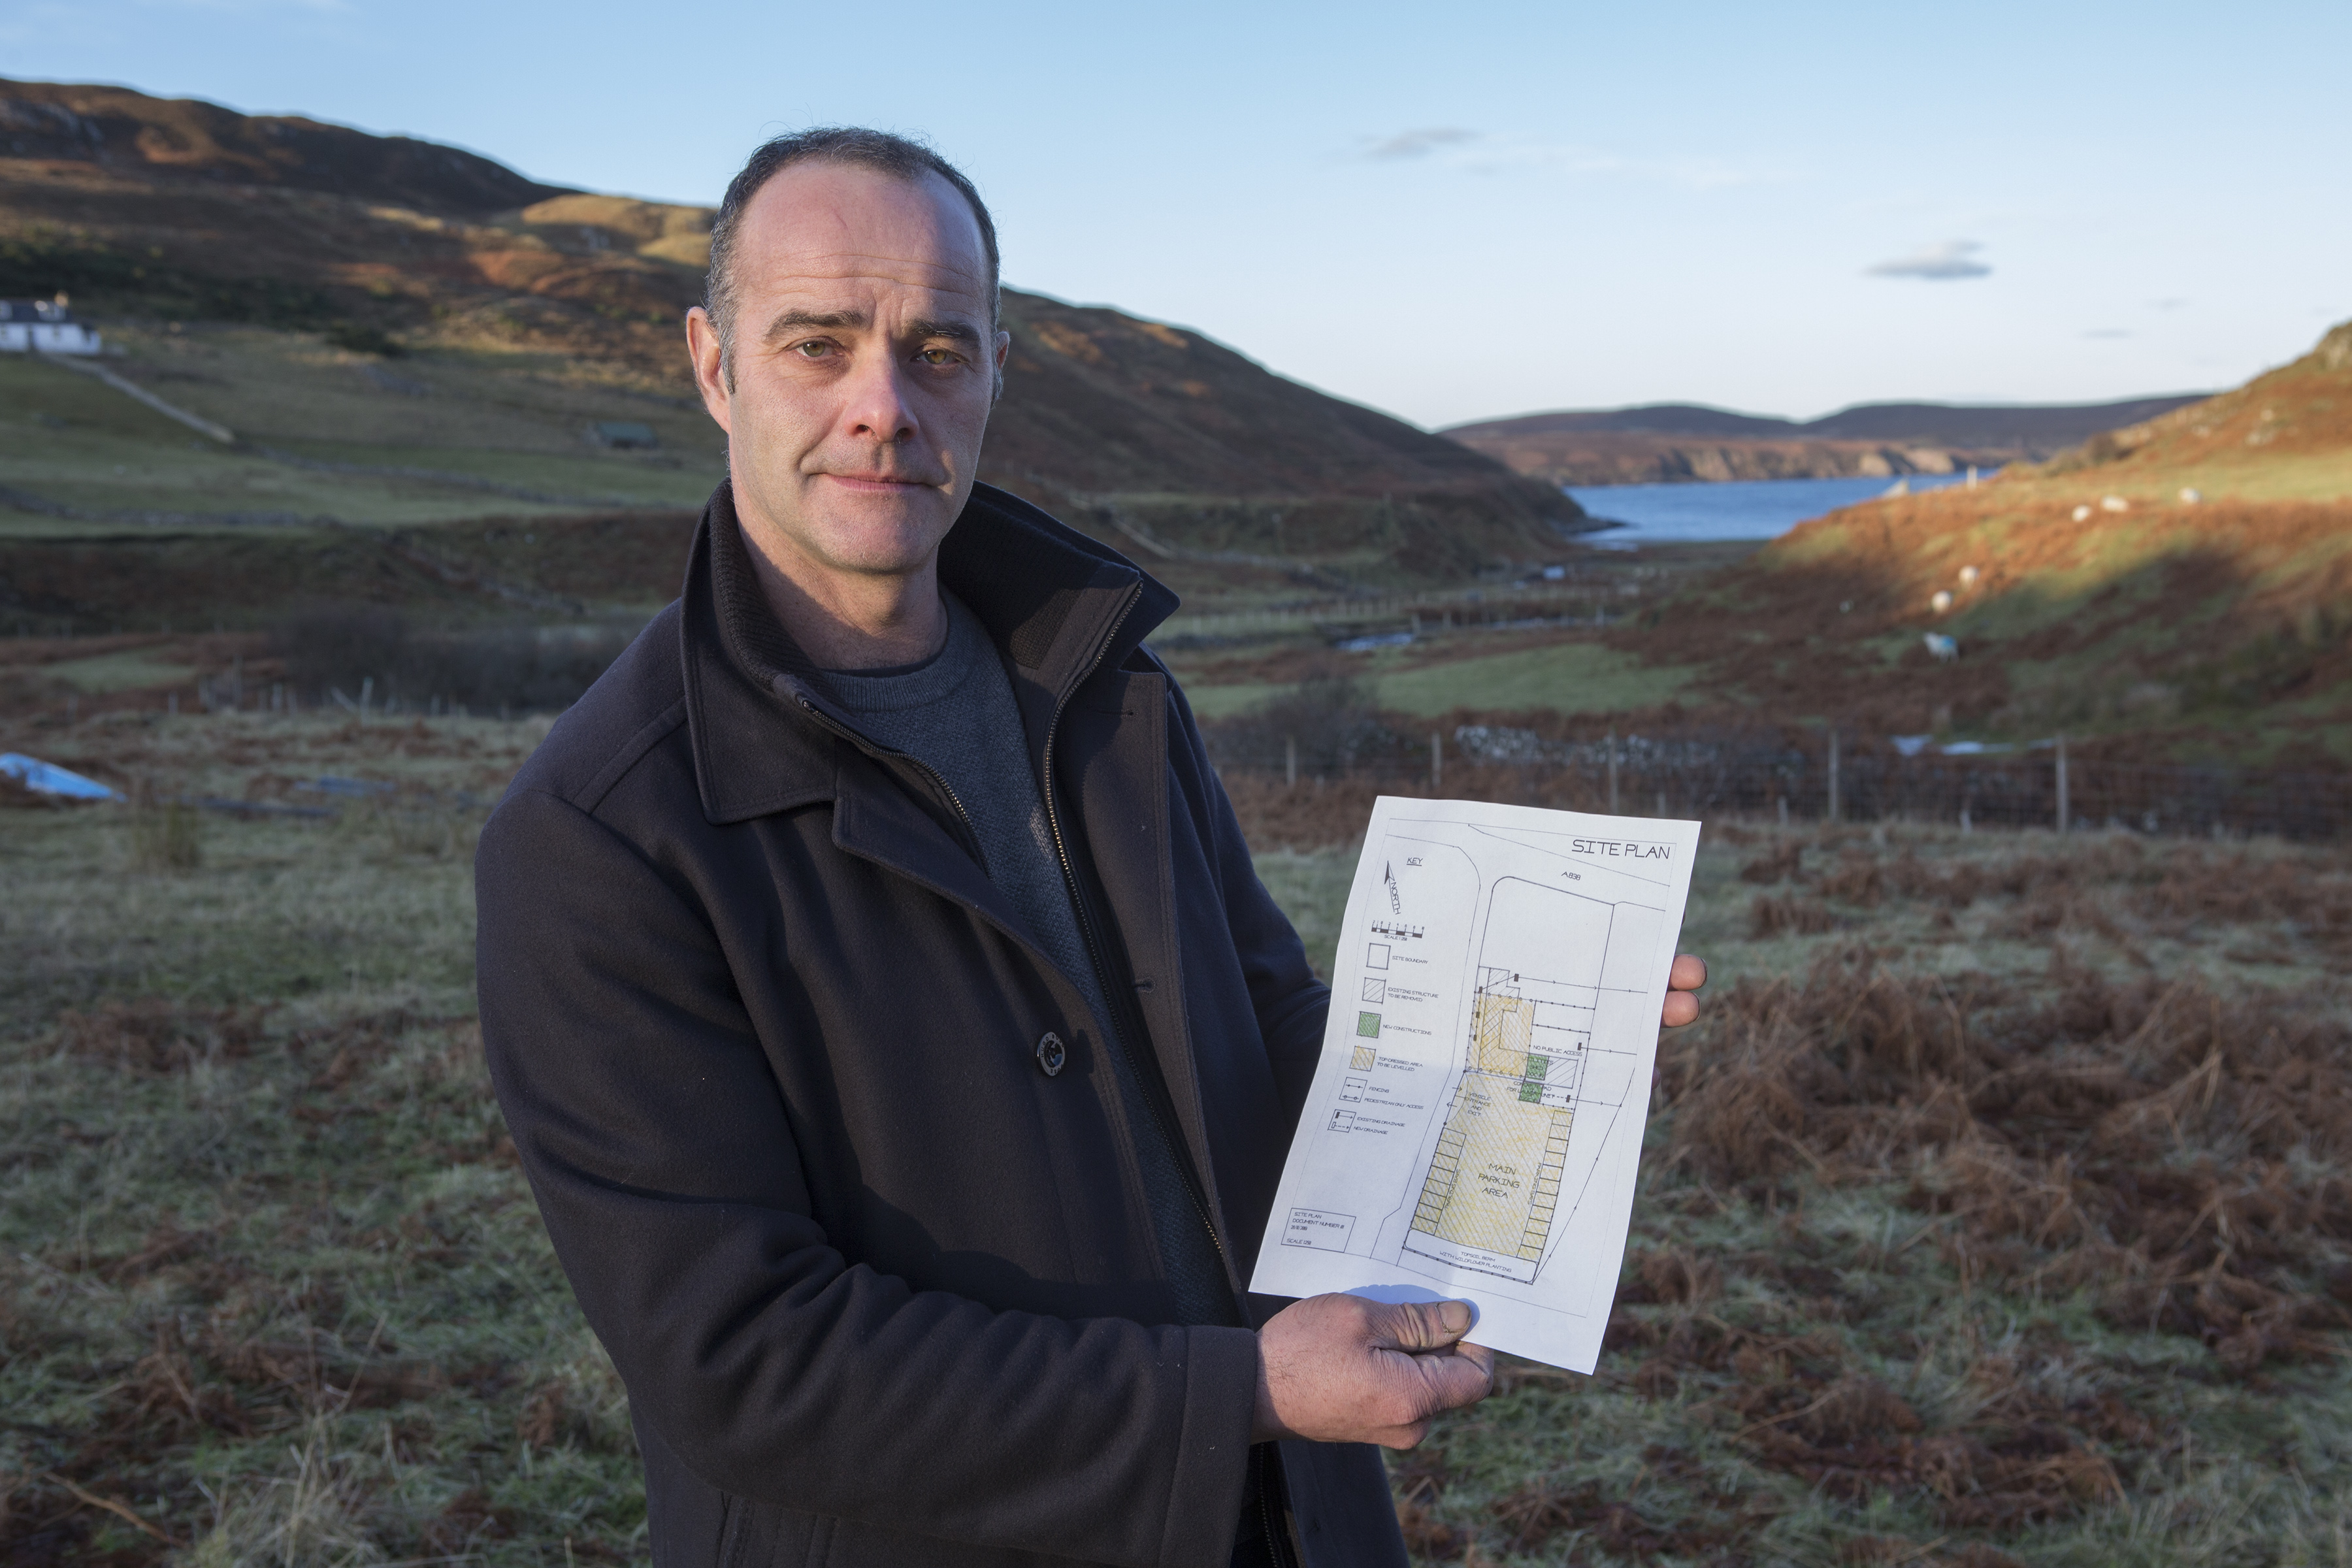 Kris Scott with his site plans for a cleaning pod at Durness, near Smoo Cave.